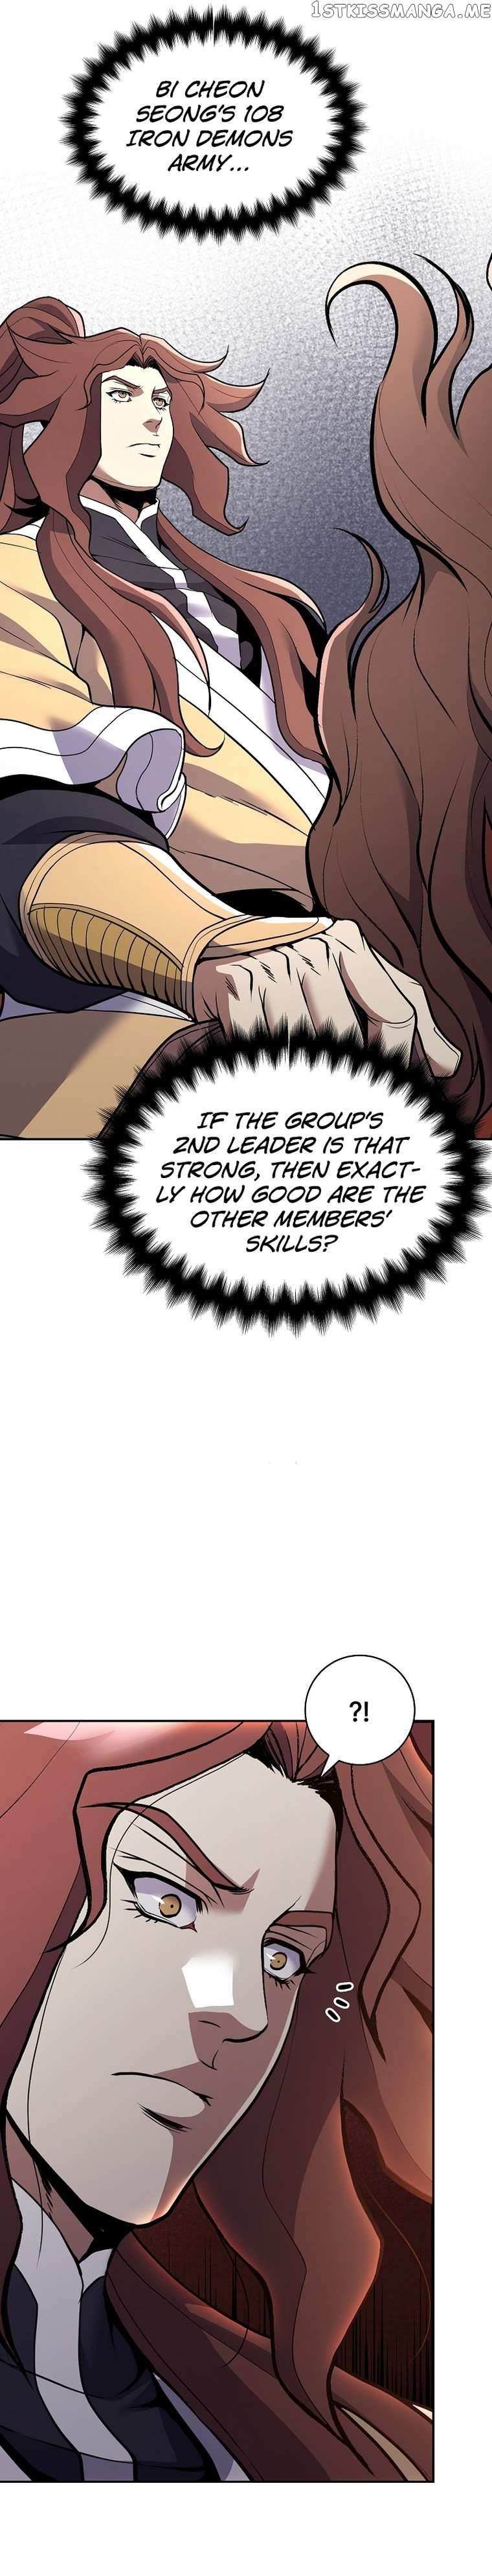 The Flag Bearer Warrior - Page 3